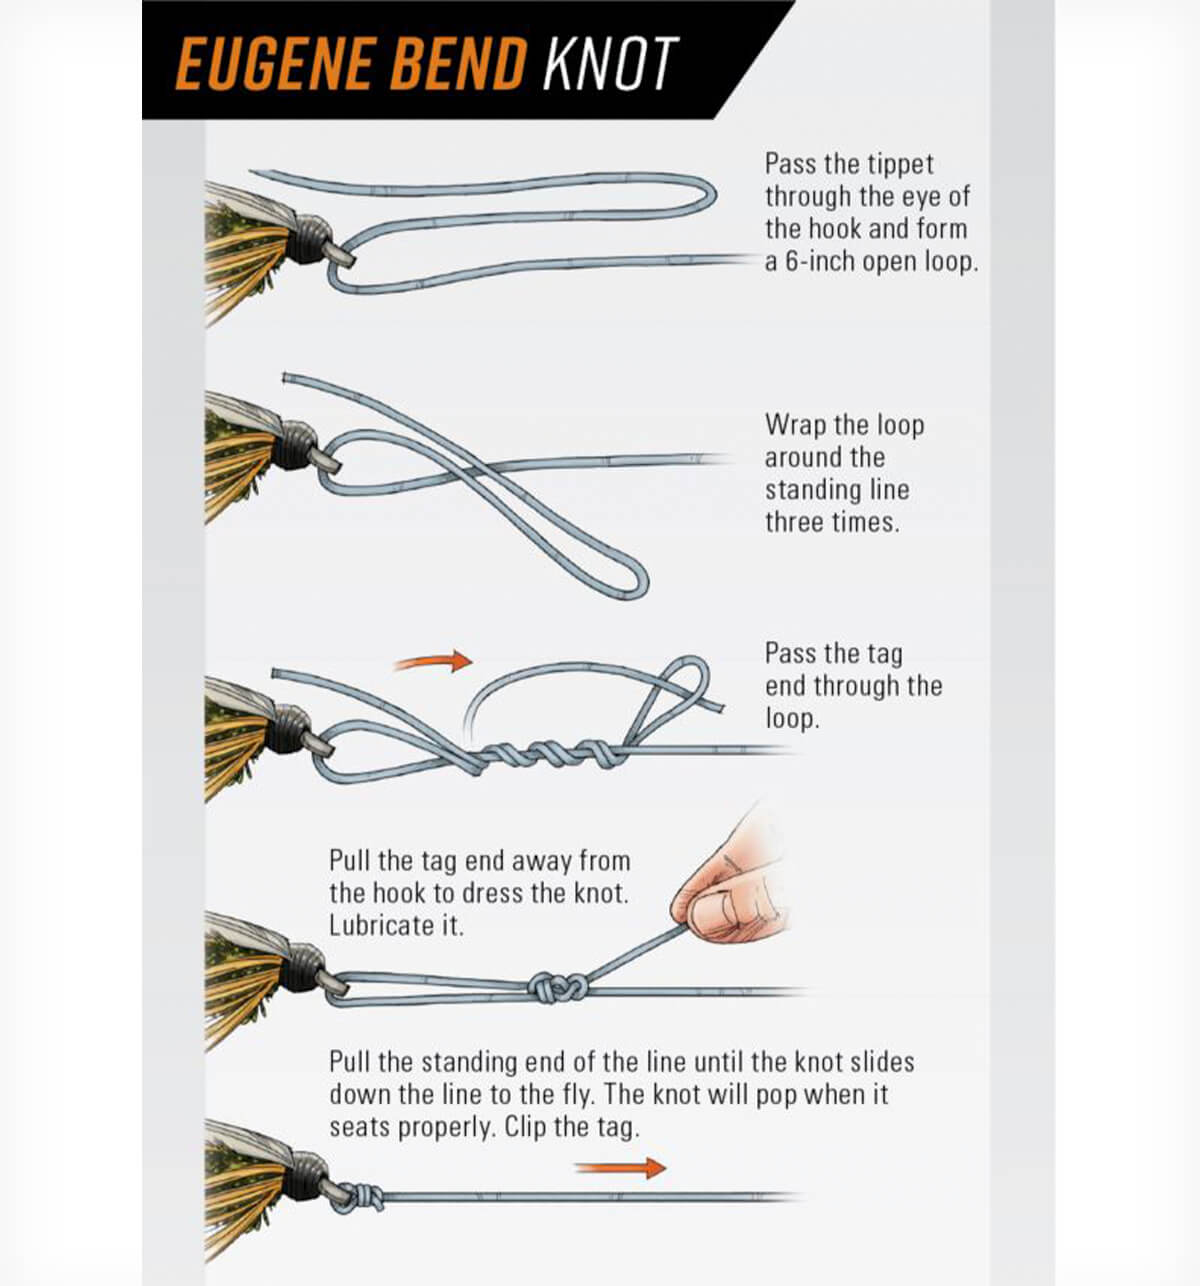 Knot(s) to tie end of fishing line under tension